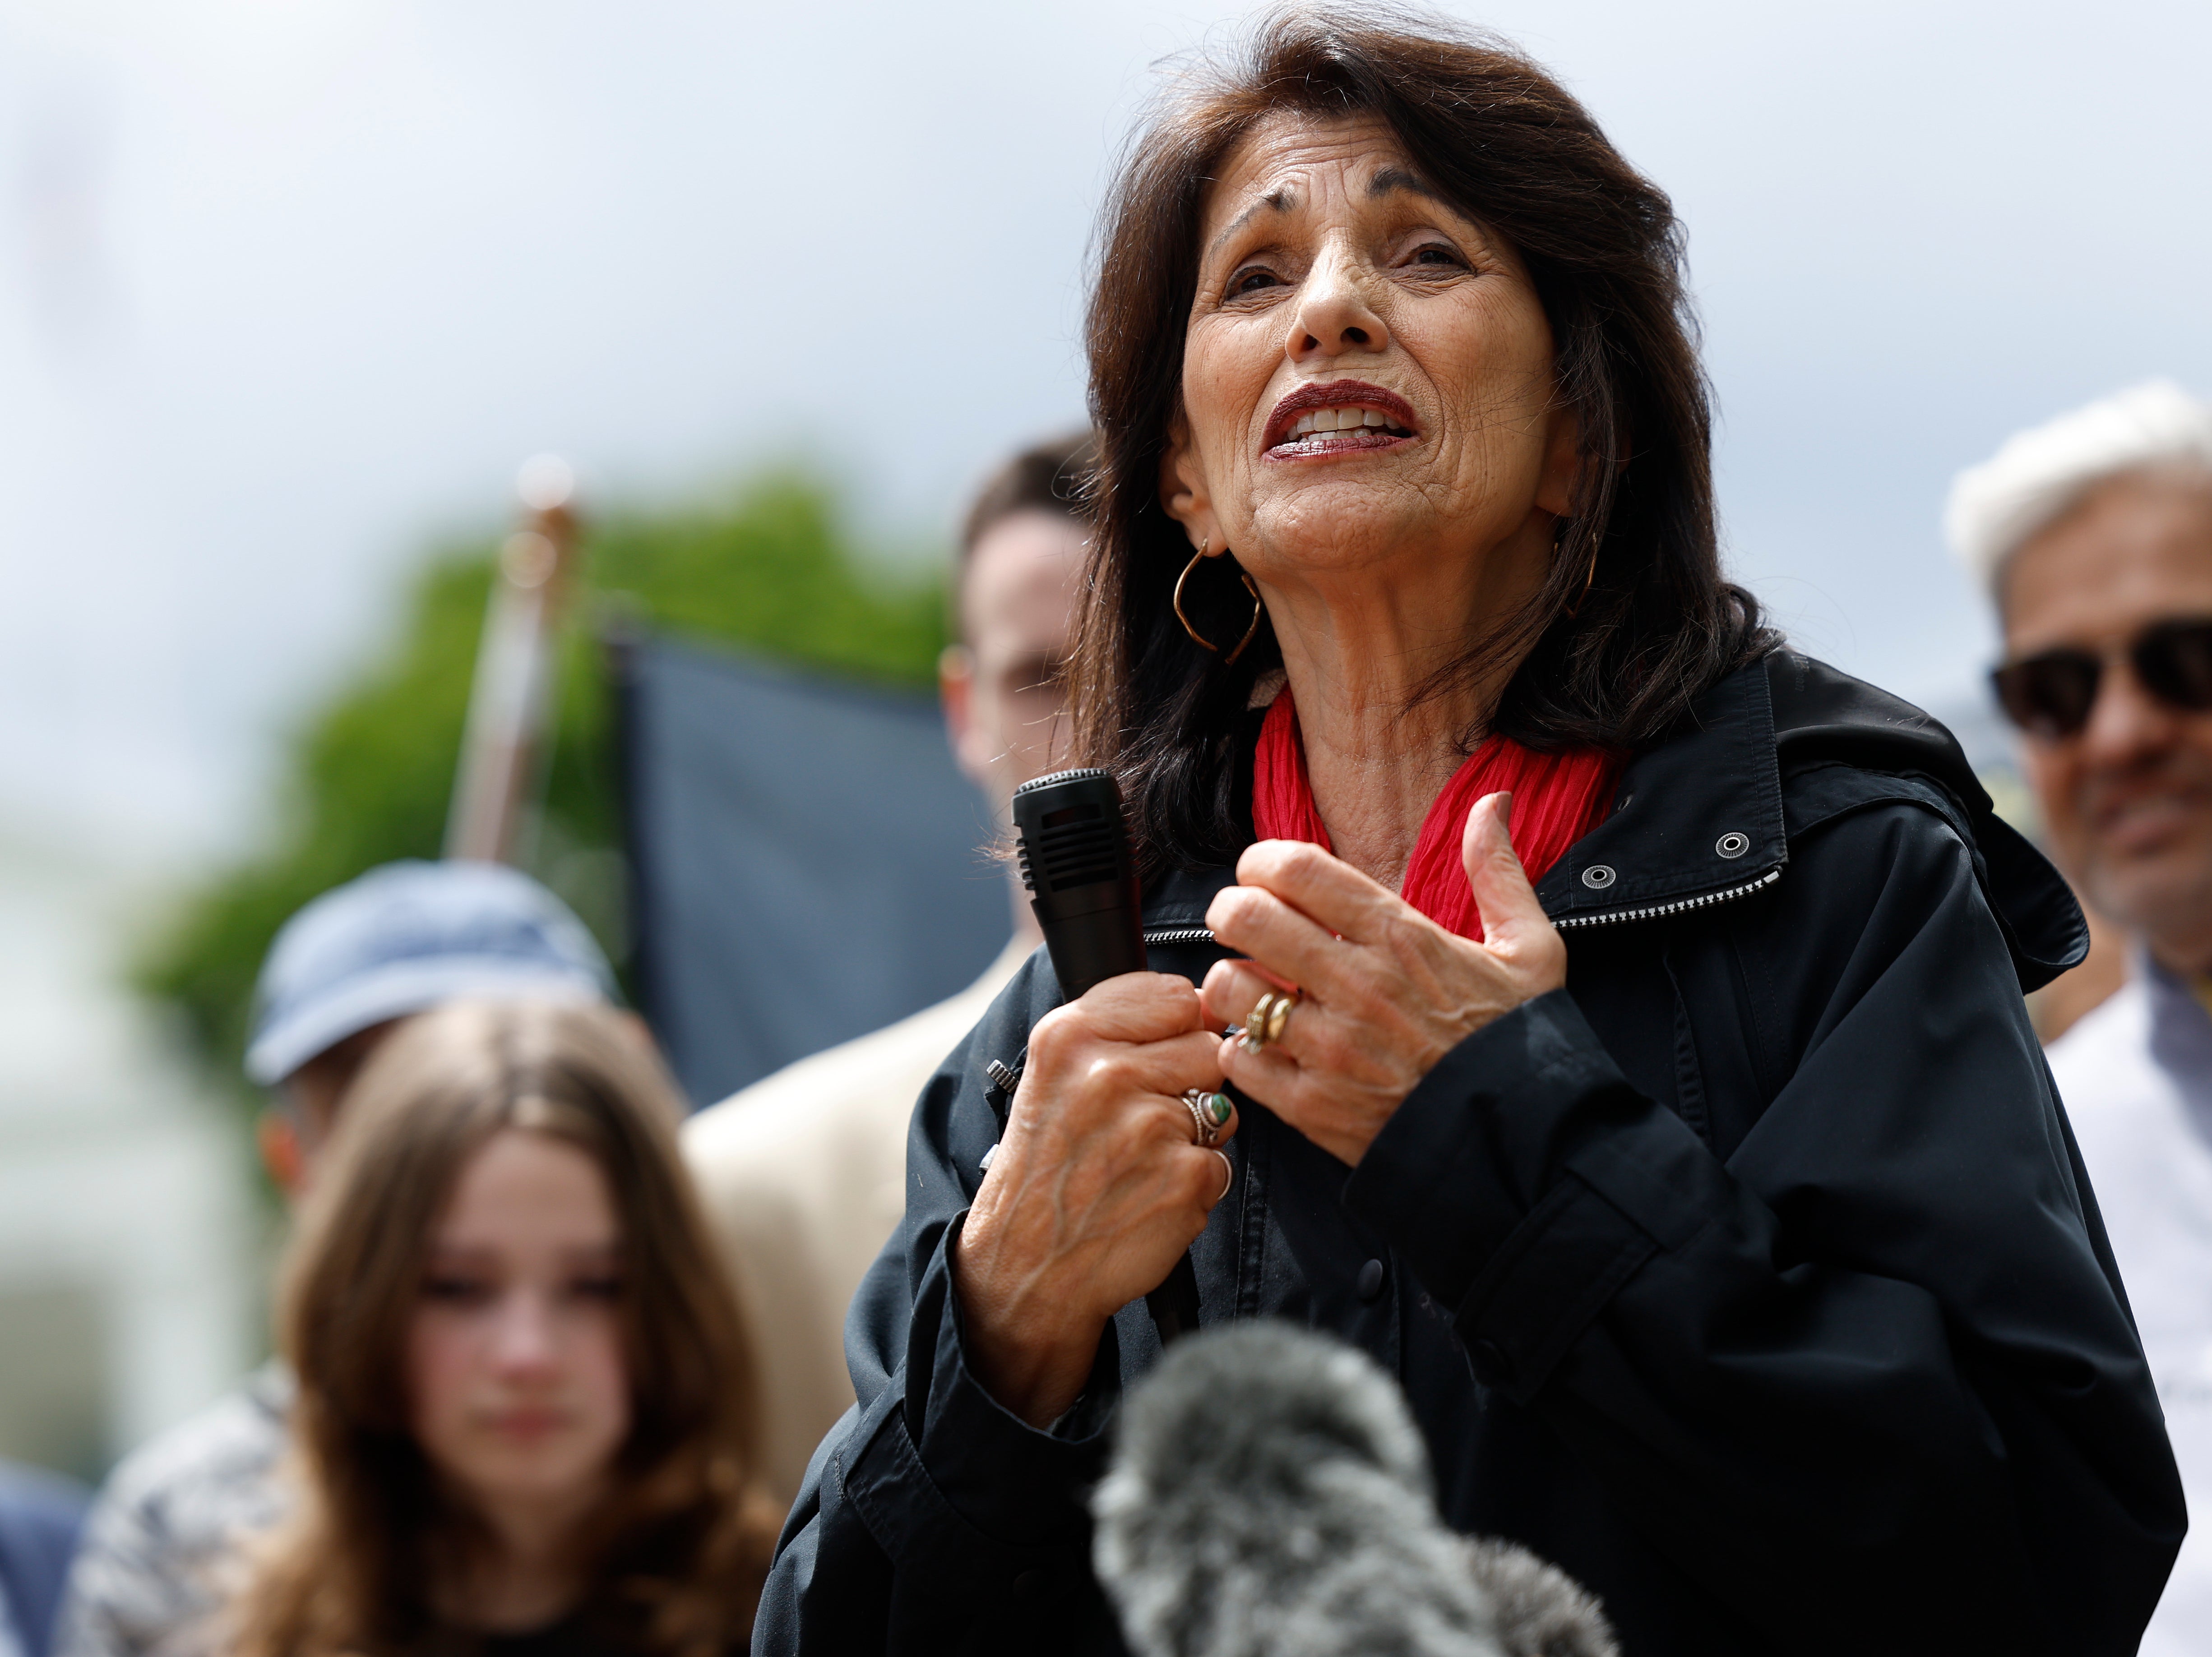 Foley speaks at a rally hosted by Bring Back our Families in Lafayette Park, Washington, DC, in 2023